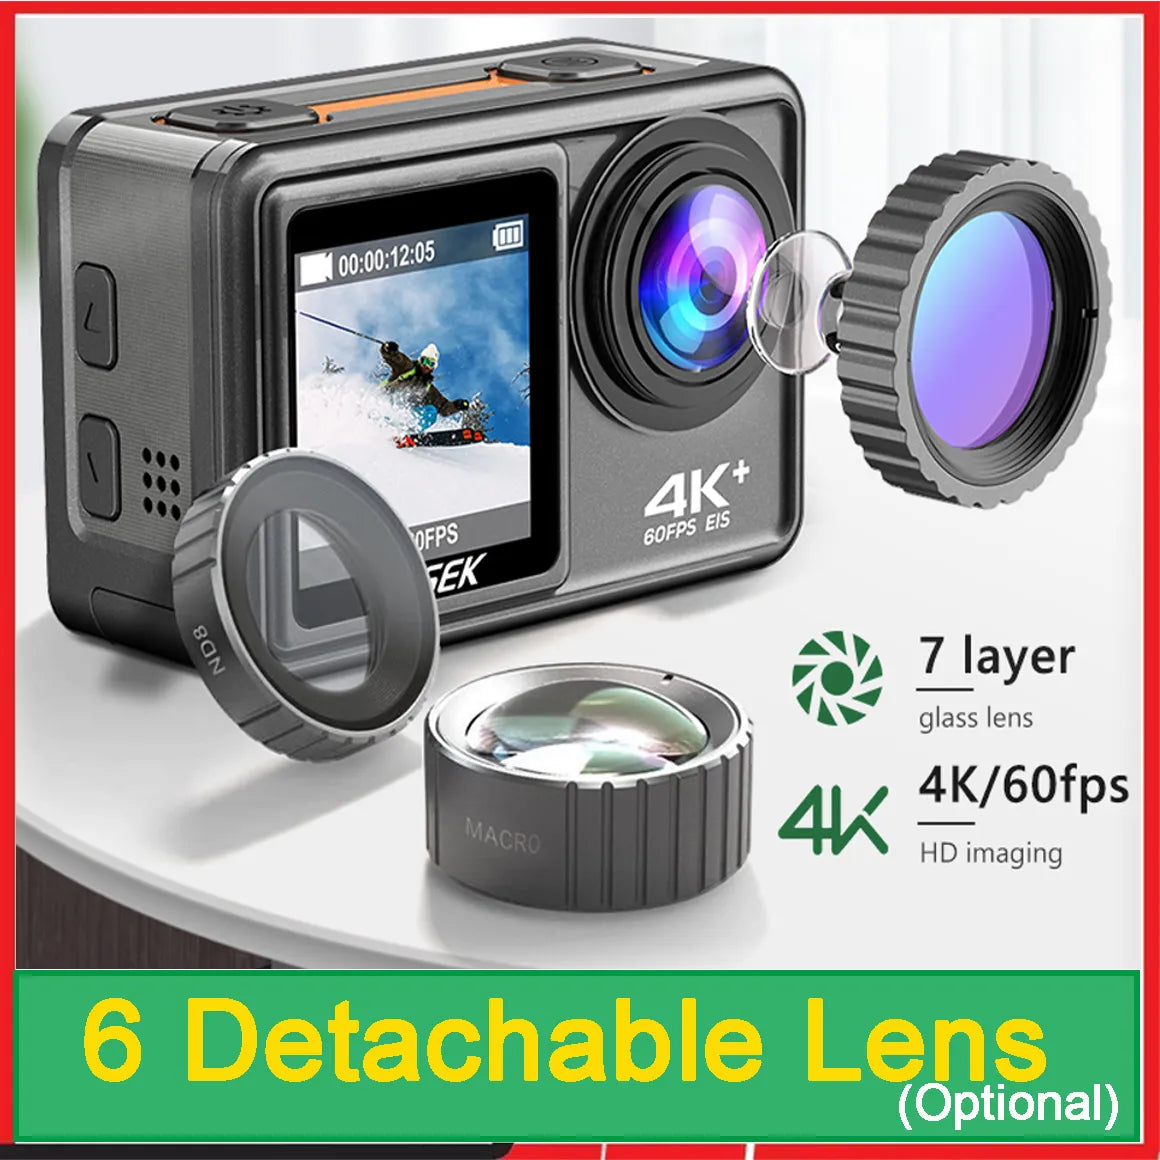 AUSEK S81TR Action Camera 5K 4K60FPS EIS Video with Optional Filter Lens 48MP Zoom 1080P Webcam Vlog WiFi Sports Cam with Remote